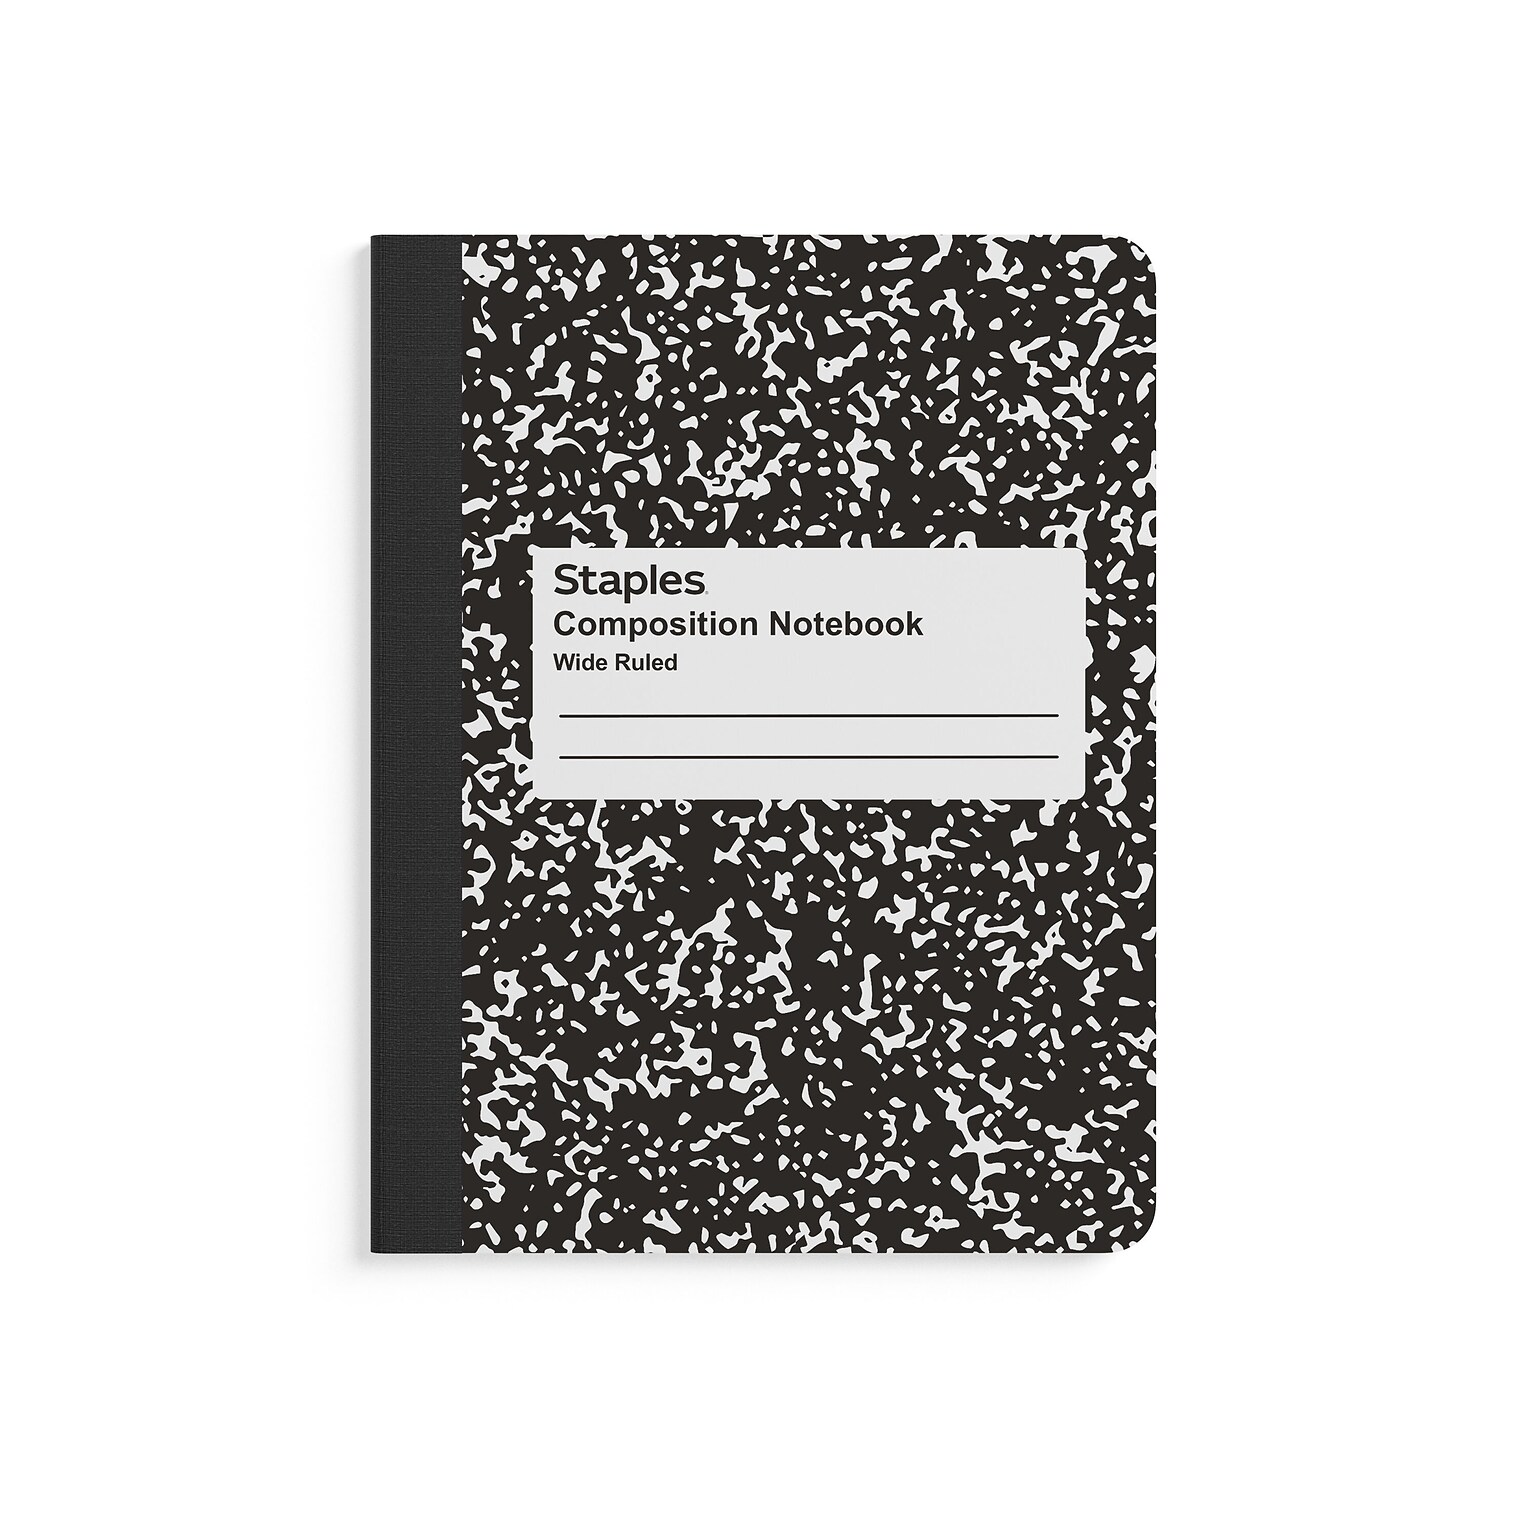 Staples® Composition Notebooks, 7.5 x 9.75, Wide Ruled, 100 Sheets, Black/White Marble, 4/Pack (ST58369)